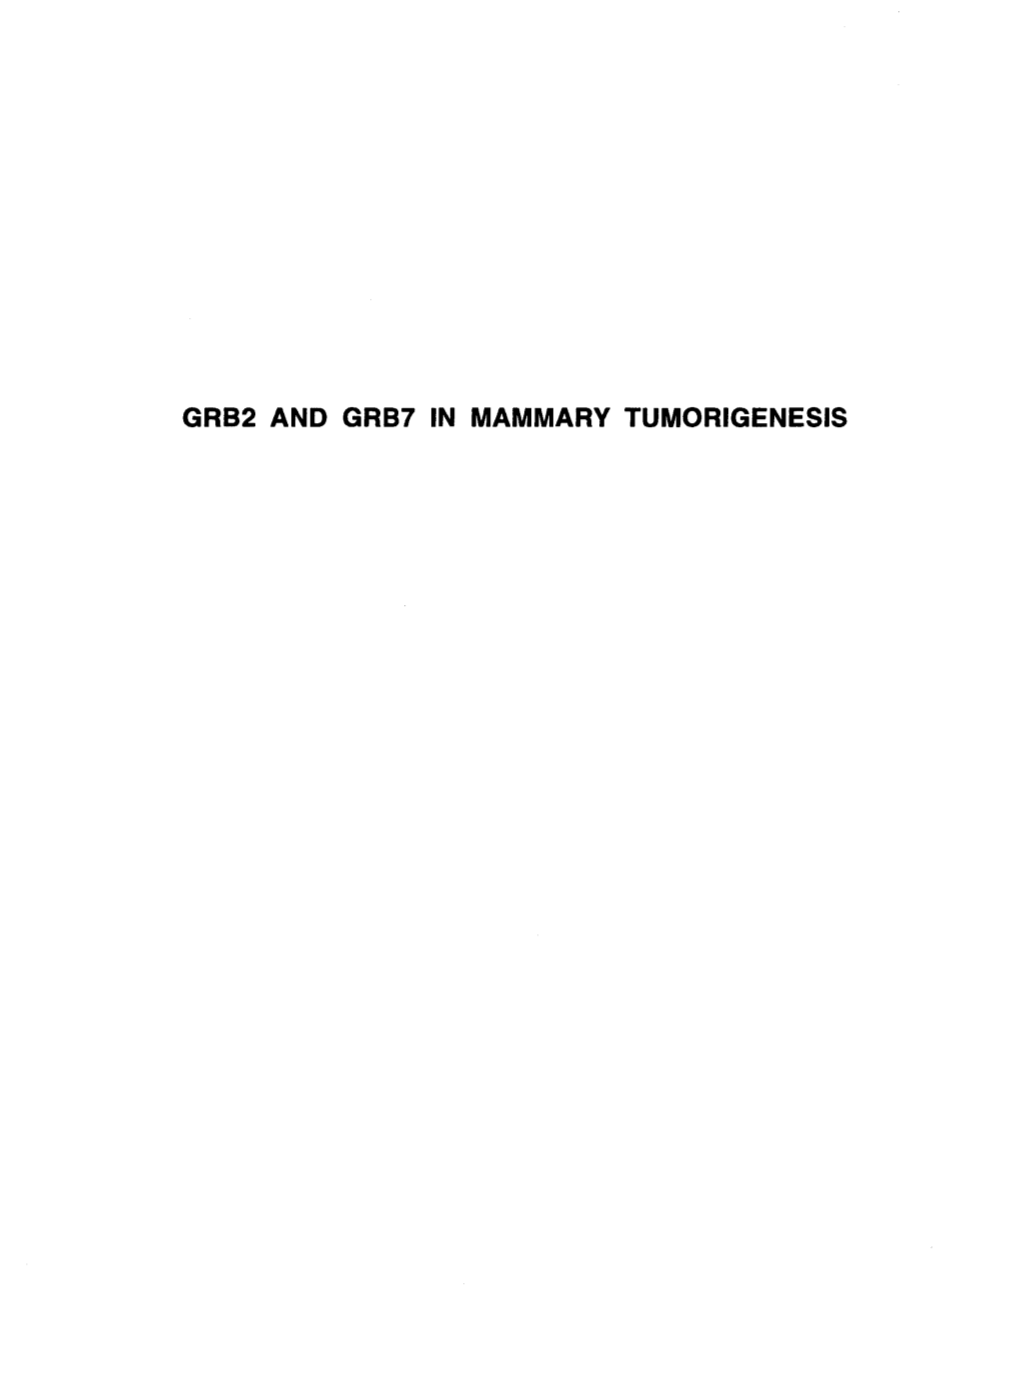 Grb2 and Grb7 in Mammary Tumorigenesis the Role of Grb2 and Grb7 in Polyomavirus Middle T Antigen- and Neu-Mediated Mammary Tumorigenesis